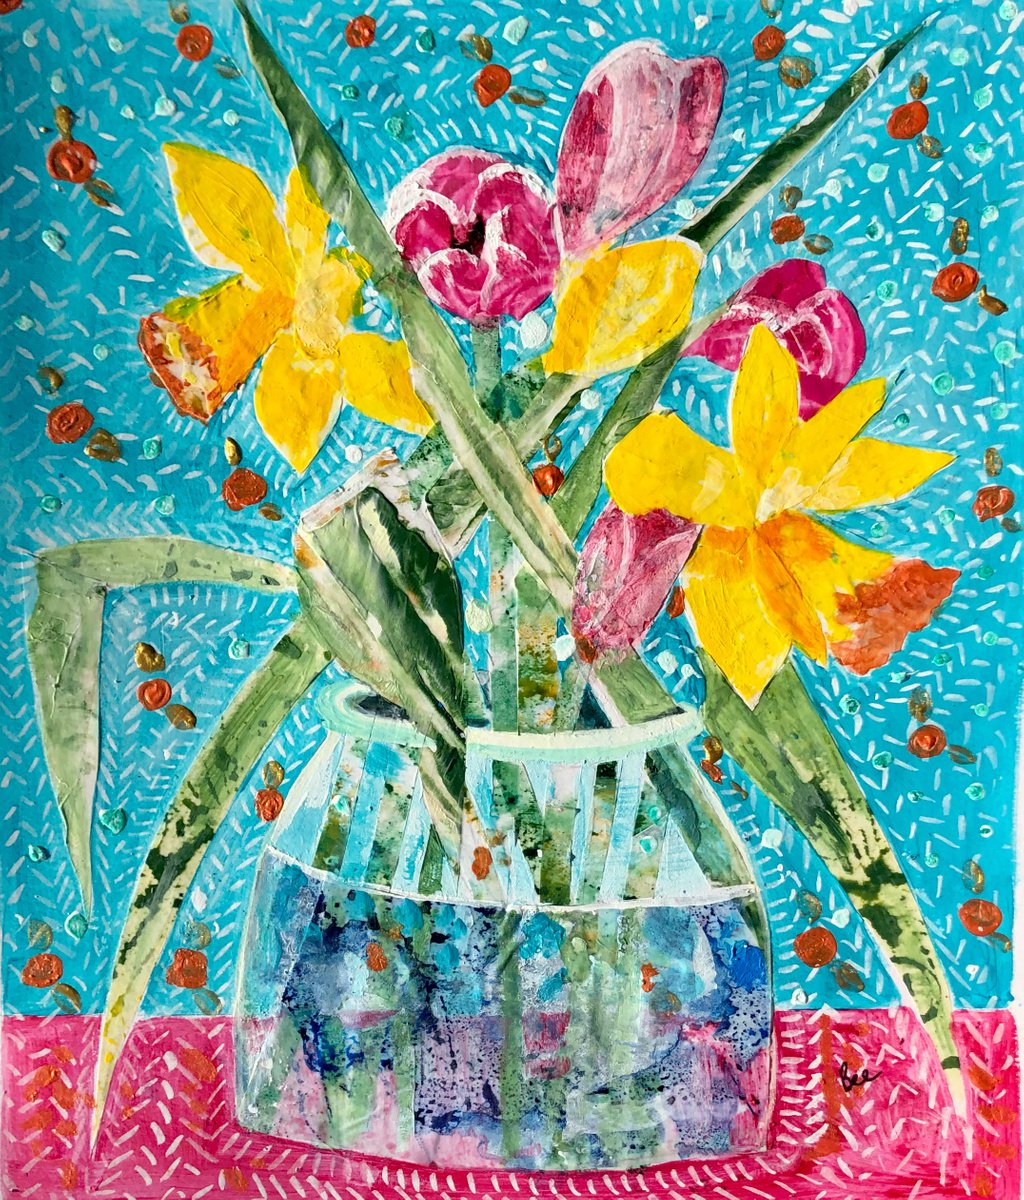 Daffodils and Tulips in a Glass Vase by Bee Inch